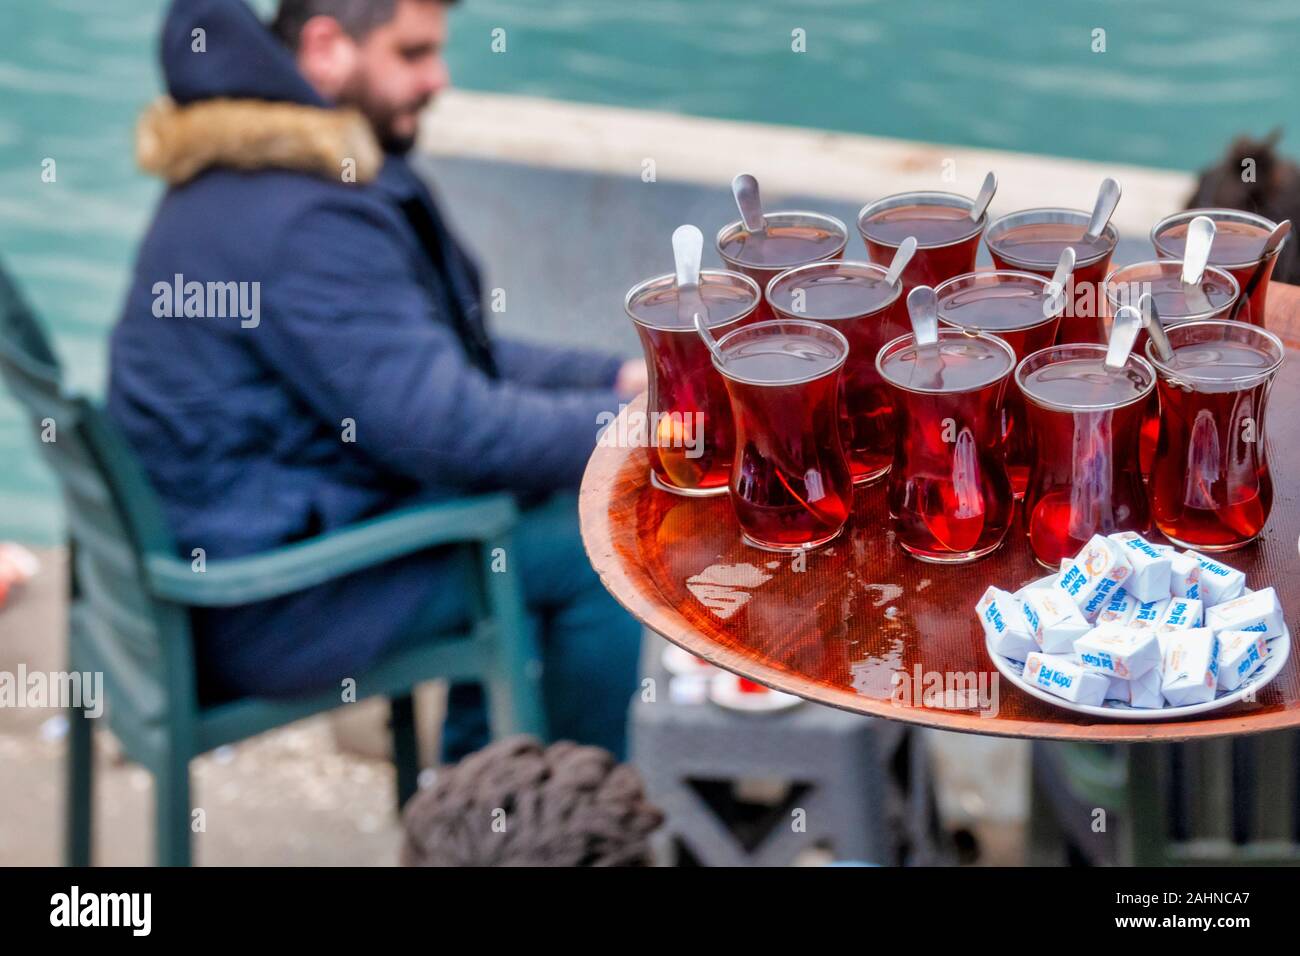 Turkish tea served in the typical manner Stock Photo